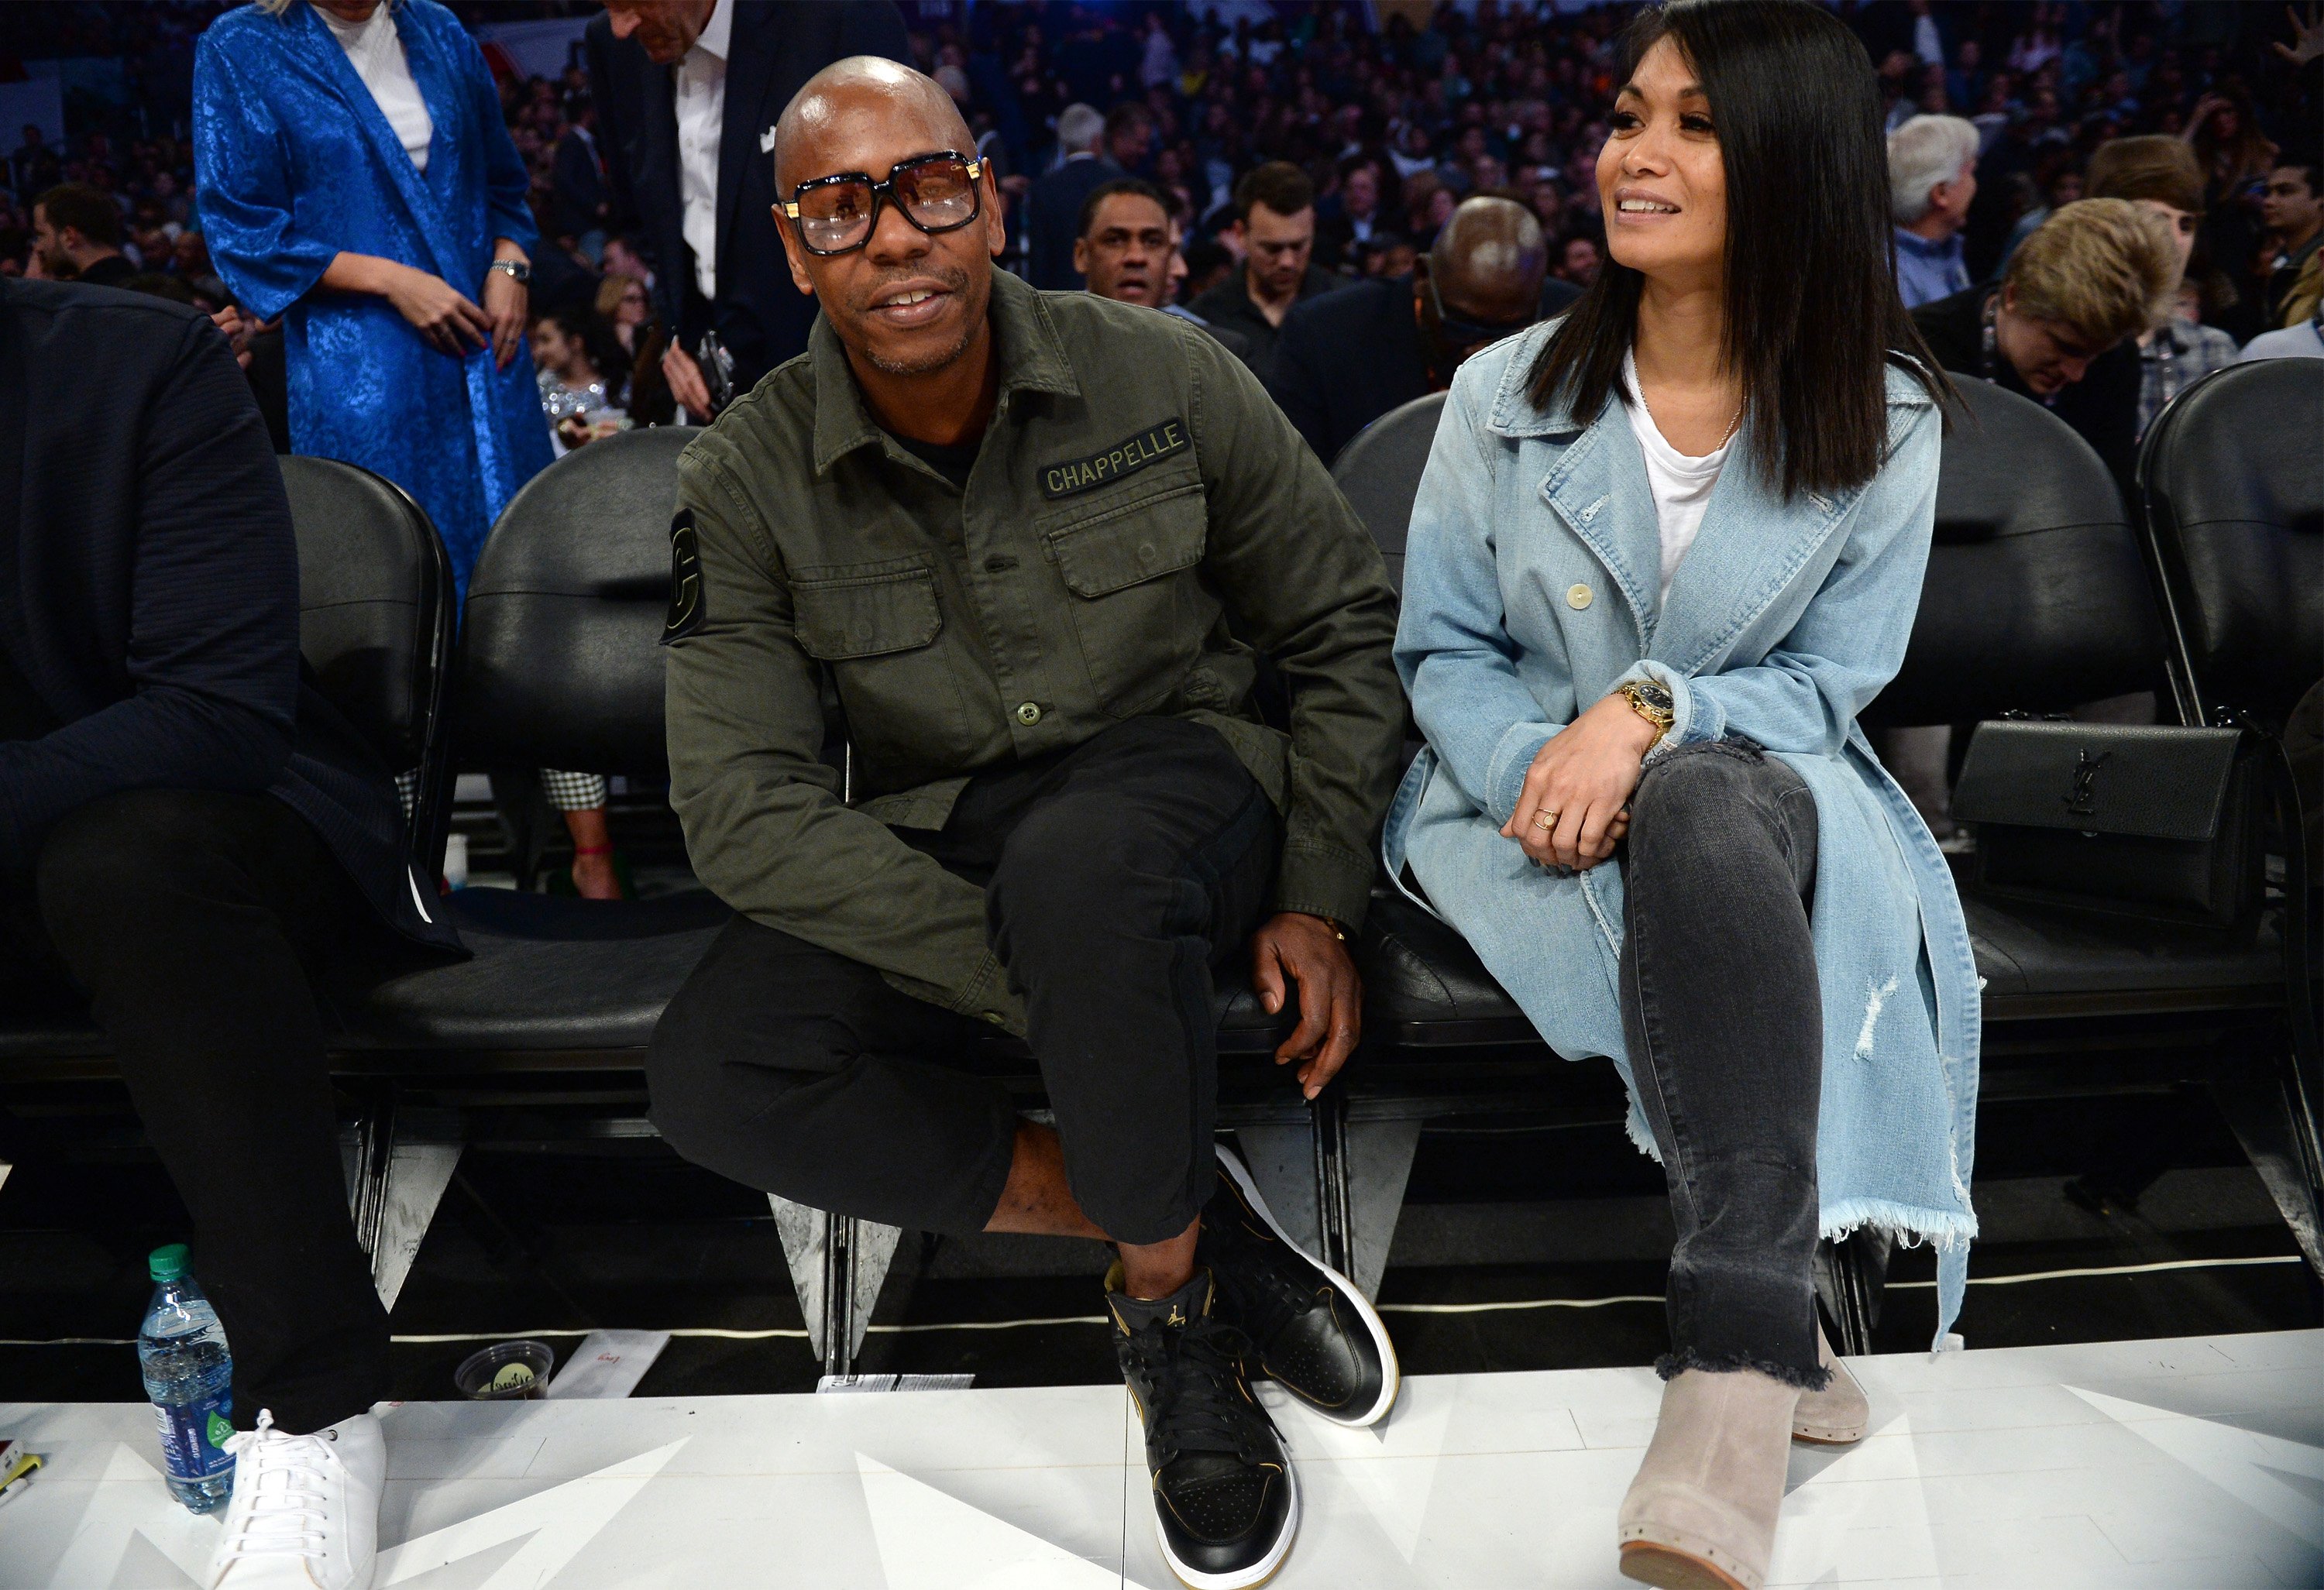 Dave Chappelle and wife Elaine sitting courtside at an NBA game